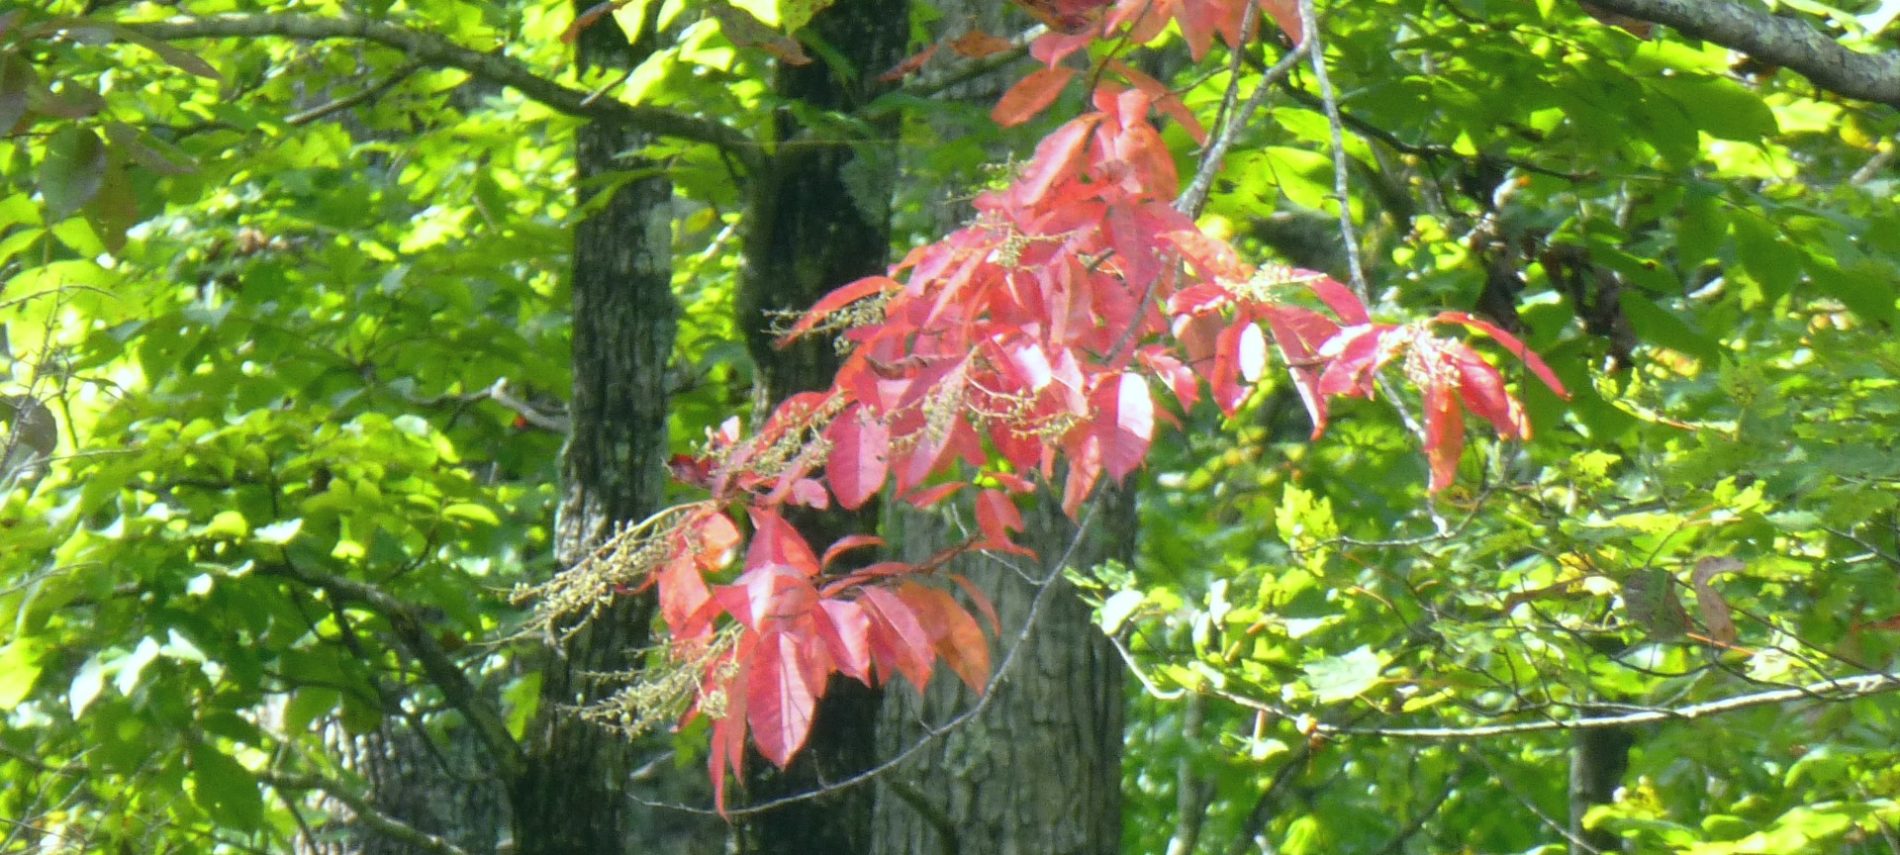 Tree branches with one branch having brightly colored leaves